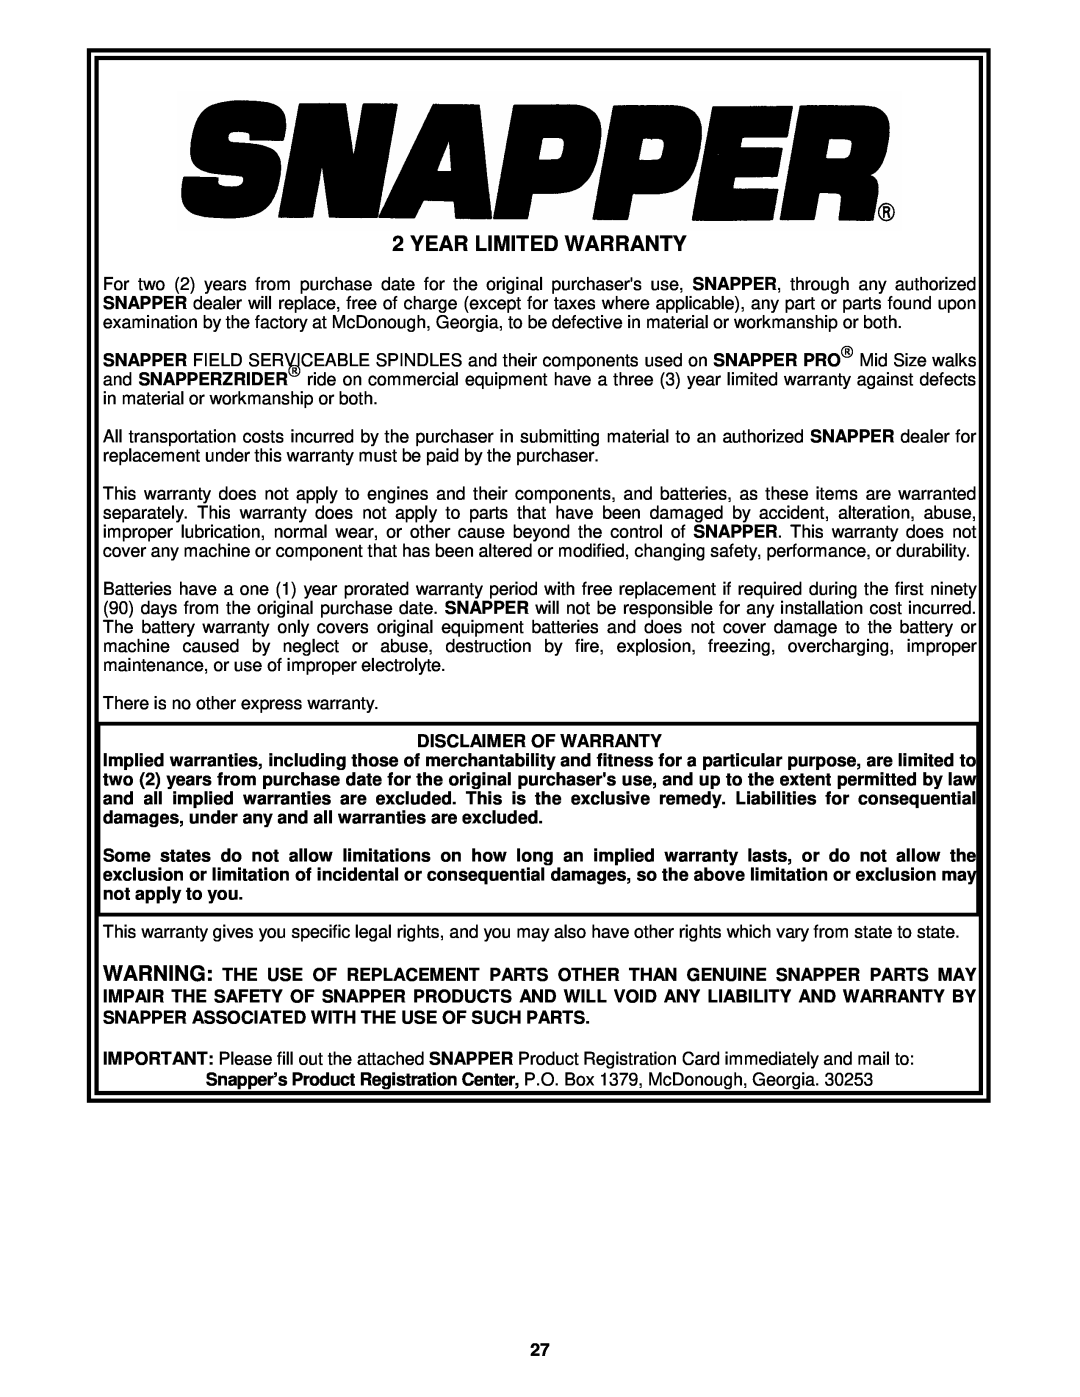 Snapper SPEL150KH, SPE481, SPE361 important safety instructions Year Limited Warranty 